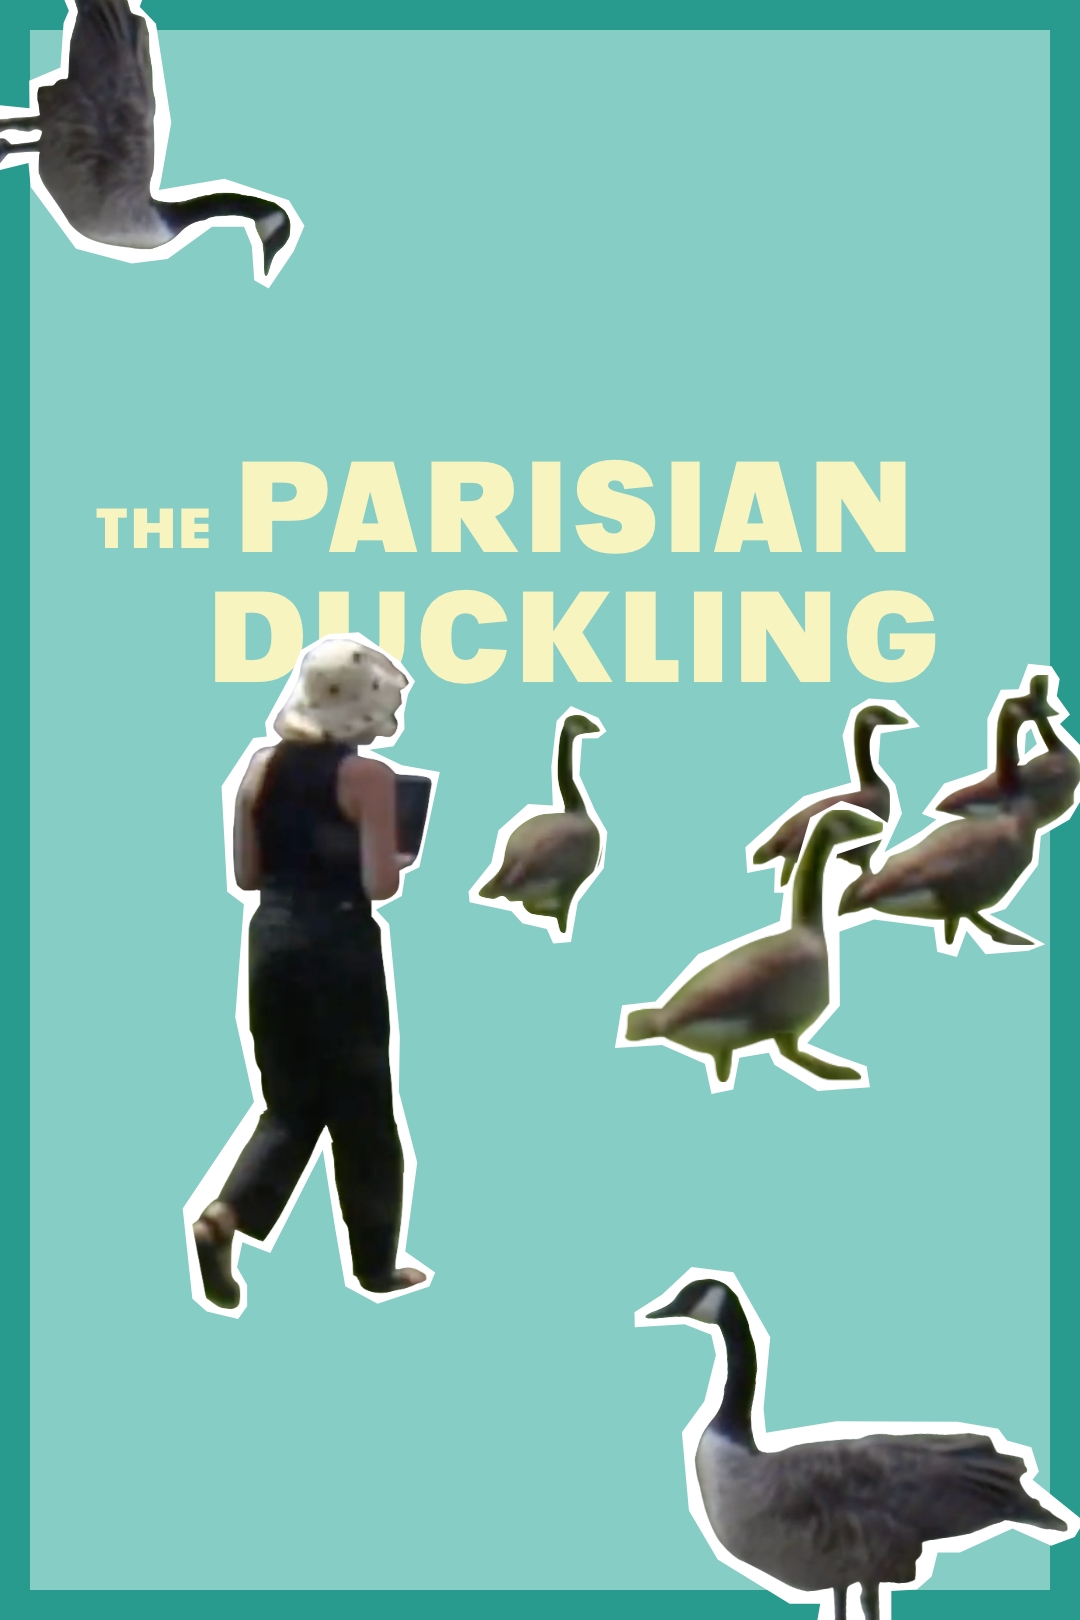 Poster for the film "The Parisian Duckling"